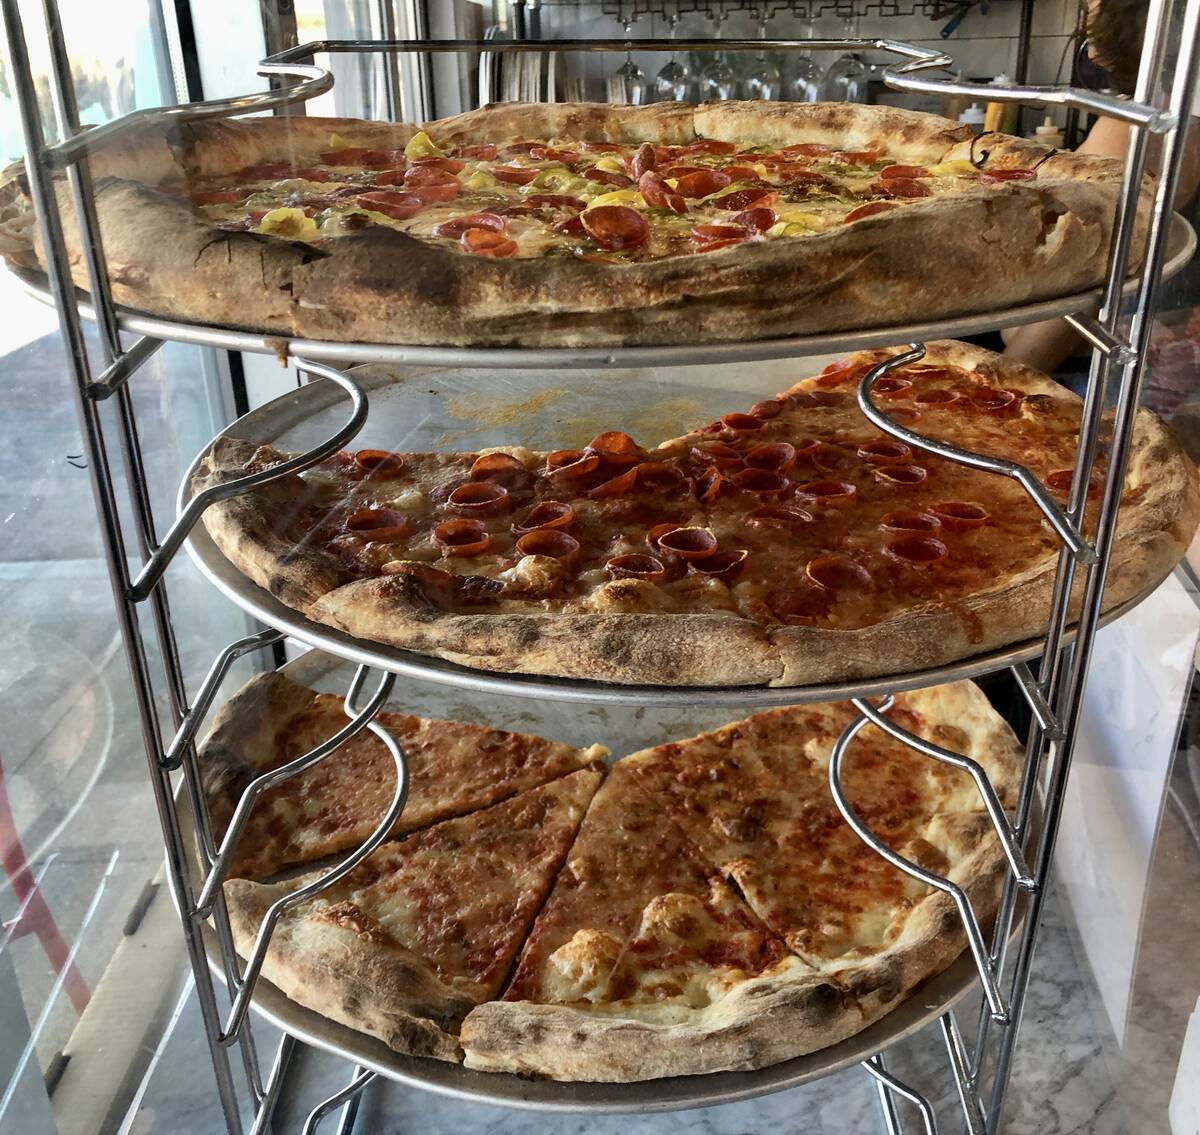 Slices from Yukon Pizza in Las Vegas. (Johnathan L. Wright/Las Vegas Review-Journal)